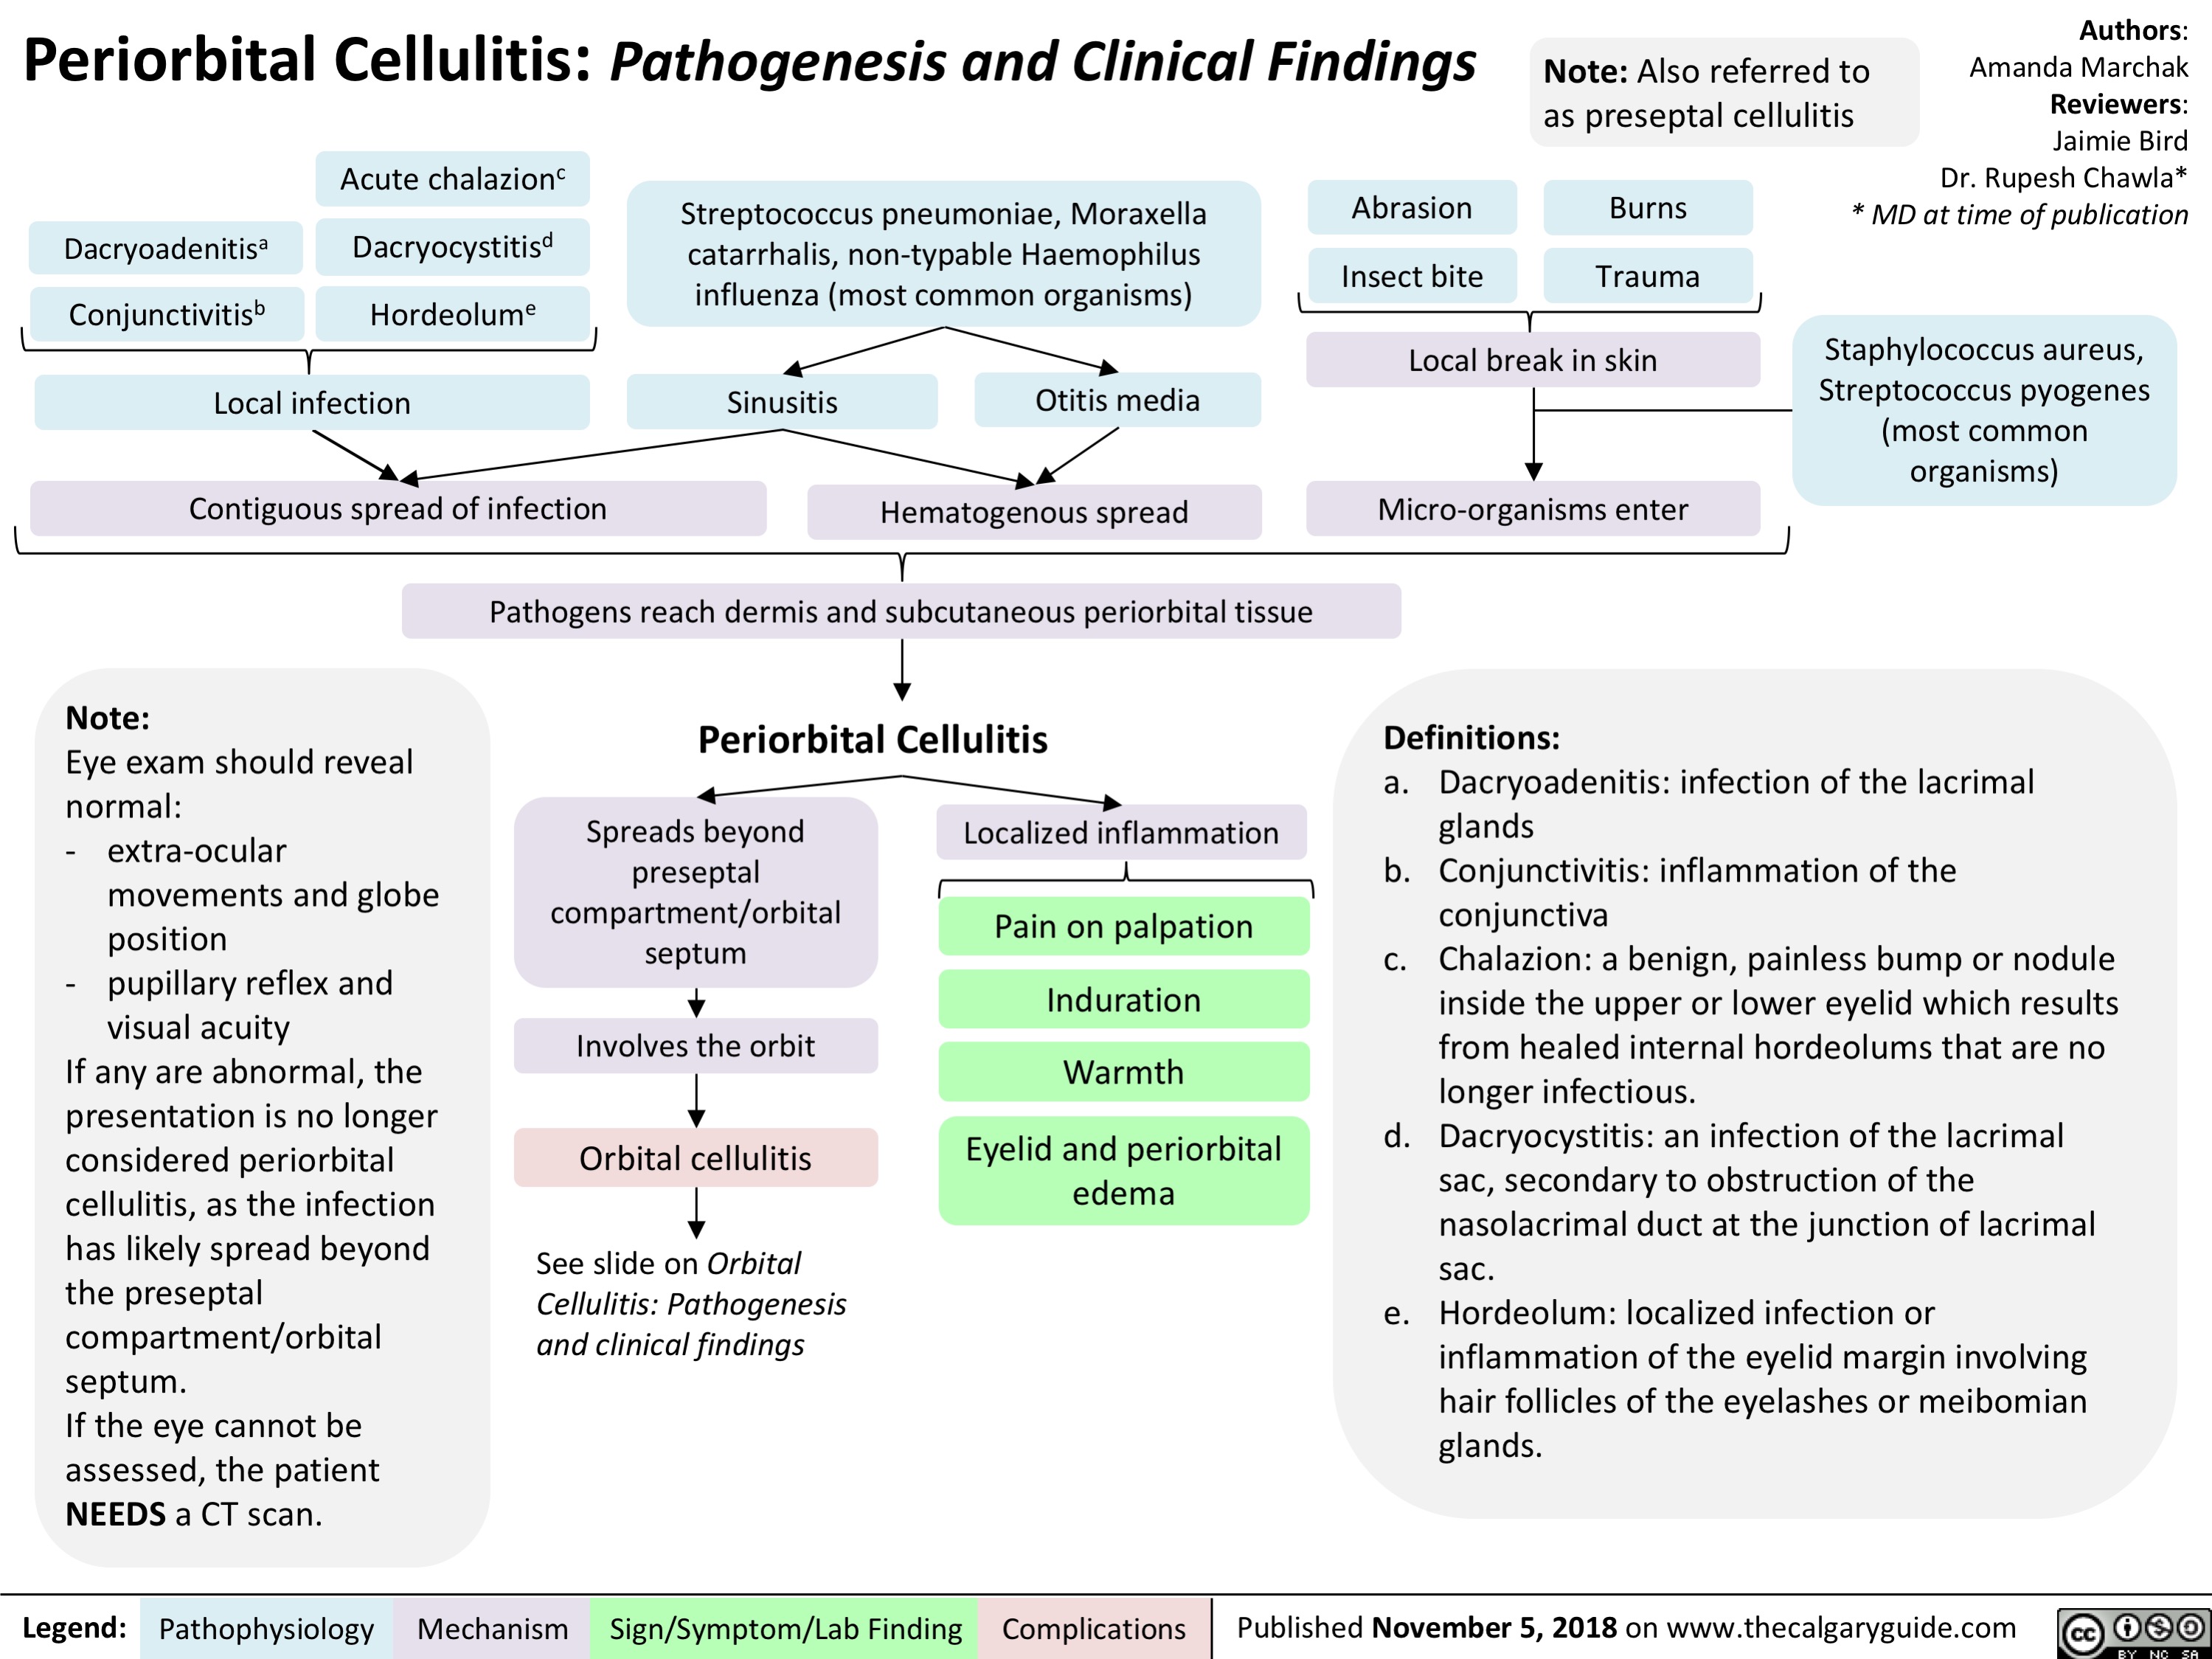 Periorbital Cellulitis: Pathogenesis and Clinical Findings
Authors: Amanda Marchak Reviewers: Jaimie Bird Dr. Rupesh Chawla* * MD at time of publication
Staphylococcus aureus, Streptococcus pyogenes (most common organisms)
 Note: Also referred to as preseptal cellulitis
      Dacryoadenitisa Conjunctivitisb
Acute chalazionc
Dacryocystitisd Hordeolume
Streptococcus pneumoniae, Moraxella catarrhalis, non-typable Haemophilus influenza (most common organisms)
Abrasion Insect bite
Burns Trauma
             Local infection
Contiguous spread of infection
Sinusitis
Otitis media Hematogenous spread
Local break in skin Micro-organisms enter
Definitions:
              Note:
Eye exam should reveal normal:
- extra-ocular
movements and globe
position
- pupillary reflex and
visual acuity
If any are abnormal, the presentation is no longer considered periorbital cellulitis, as the infection has likely spread beyond the preseptal compartment/orbital septum.
If the eye cannot be assessed, the patient NEEDS a CT scan.
Pathogens reach dermis and subcutaneous periorbital tissue
Periorbital Cellulitis
a. Dacryoadenitis: infection of the lacrimal glands
b. Conjunctivitis: inflammation of the conjunctiva
c. Chalazion: a benign, painless bump or nodule inside the upper or lower eyelid which results from healed internal hordeolums that are no longer infectious.
d. Dacryocystitis: an infection of the lacrimal sac, secondary to obstruction of the nasolacrimal duct at the junction of lacrimal sac.
e. Hordeolum: localized infection or inflammation of the eyelid margin involving hair follicles of the eyelashes or meibomian glands.
   Spreads beyond preseptal compartment/orbital septum
Involves the orbit Orbital cellulitis
See slide on Orbital Cellulitis: Pathogenesis and clinical findings
Localized inflammation
Pain on palpation
Induration
Warmth
Eyelid and periorbital edema
           Legend:
 Pathophysiology
 Mechanism
Sign/Symptom/Lab Finding
  Complications
Published November 5, 2018 on www.thecalgaryguide.com
   